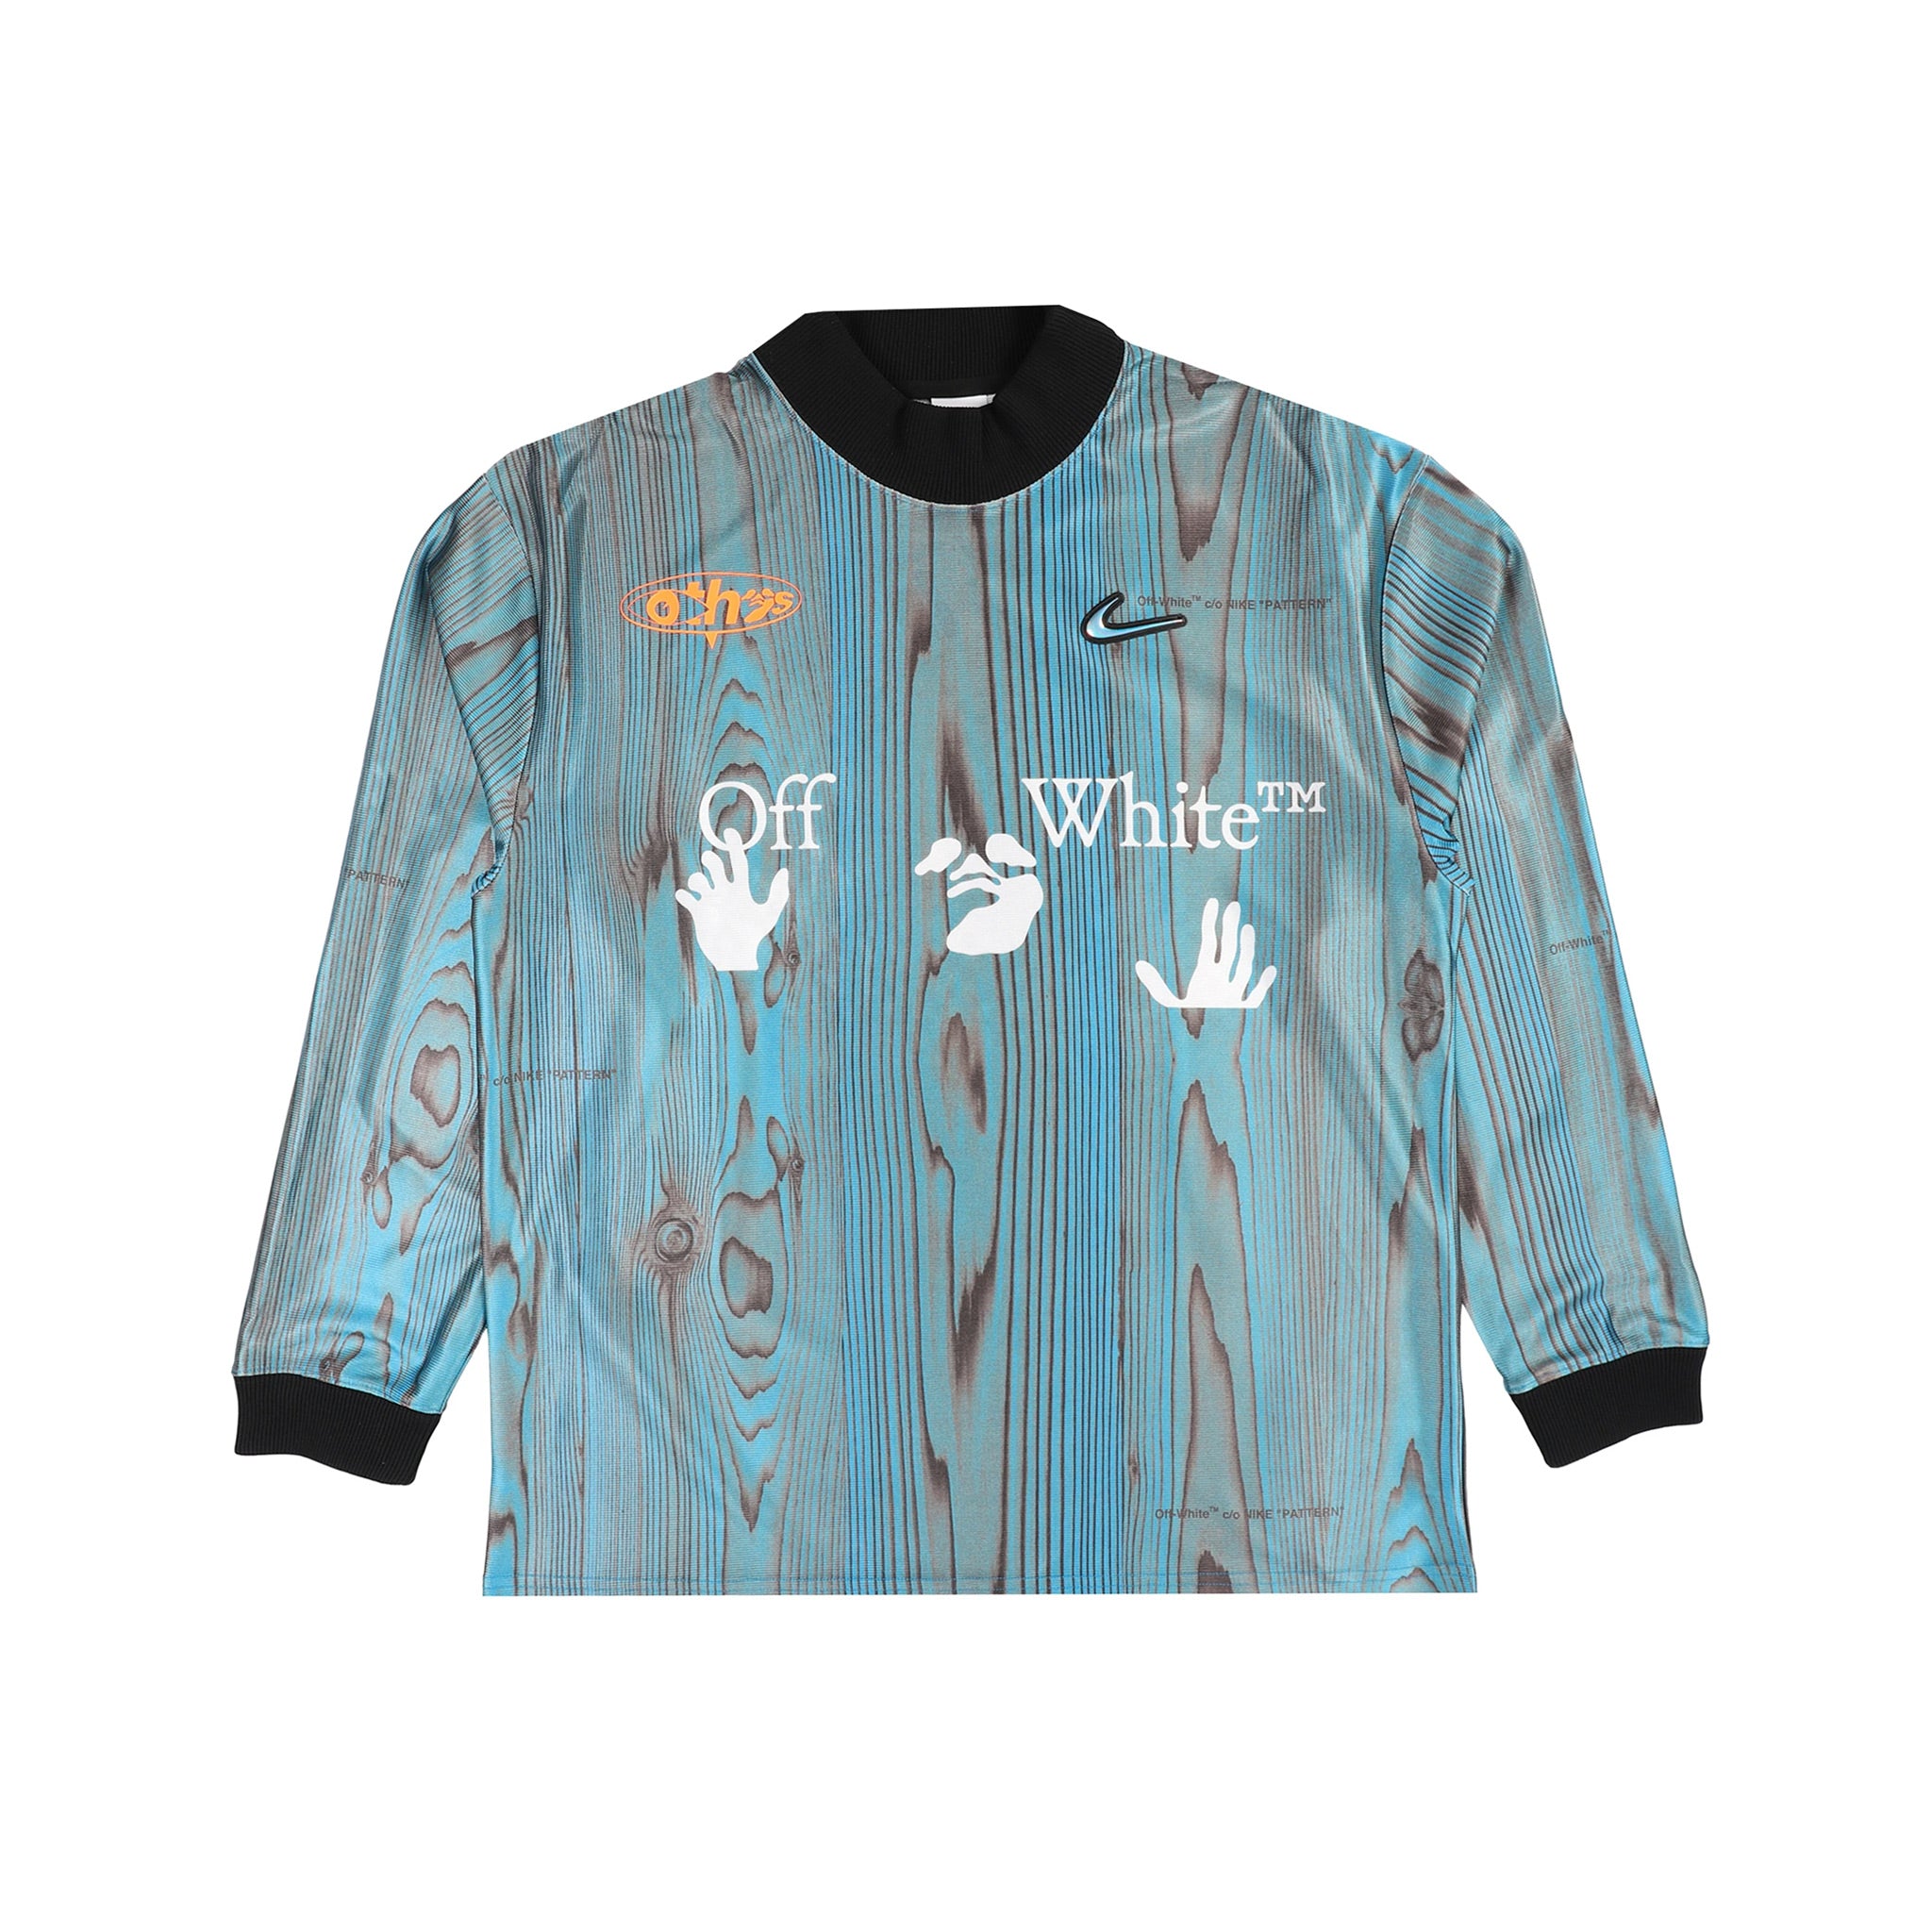 Nike x Off-White 001 Soccer Jersey - Imperial Blue | Points ...